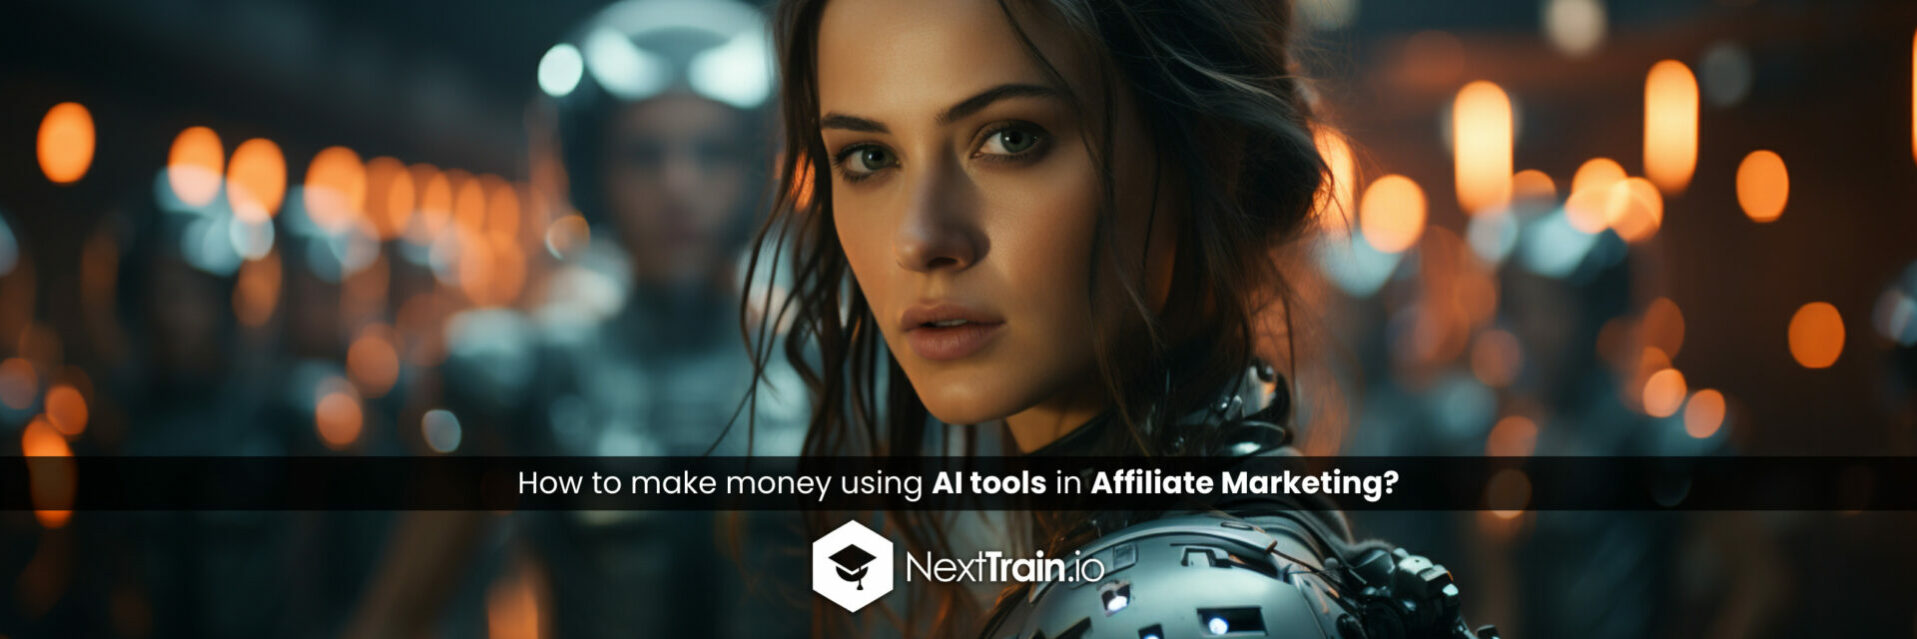 How to make money using AI tools in Affiliate Marketing?